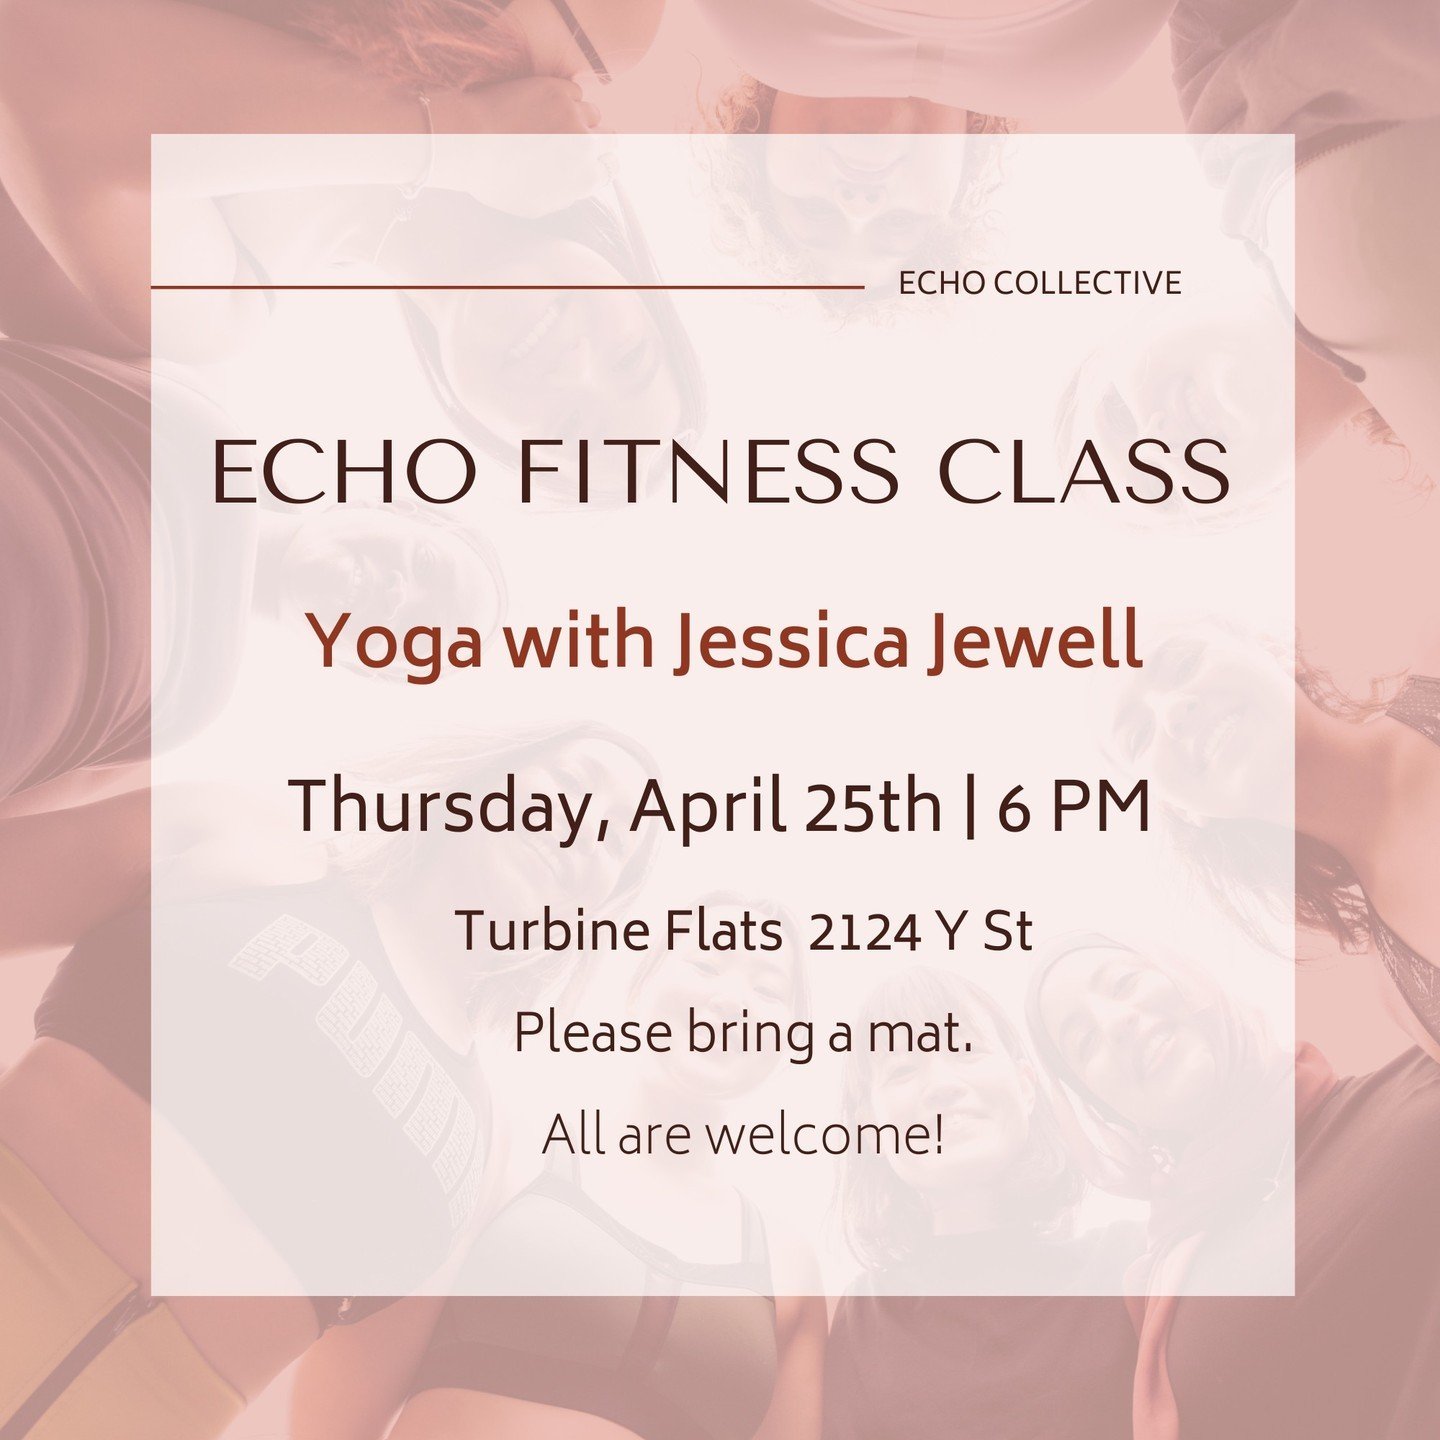 Join us for a free yoga class with Jessica Jewell! This class is a safe and fun place for women to exercise in community. ⁠
⁠
The class is held in the front gallery room. No registration is required. Please bring a mat and enter through the doors alo